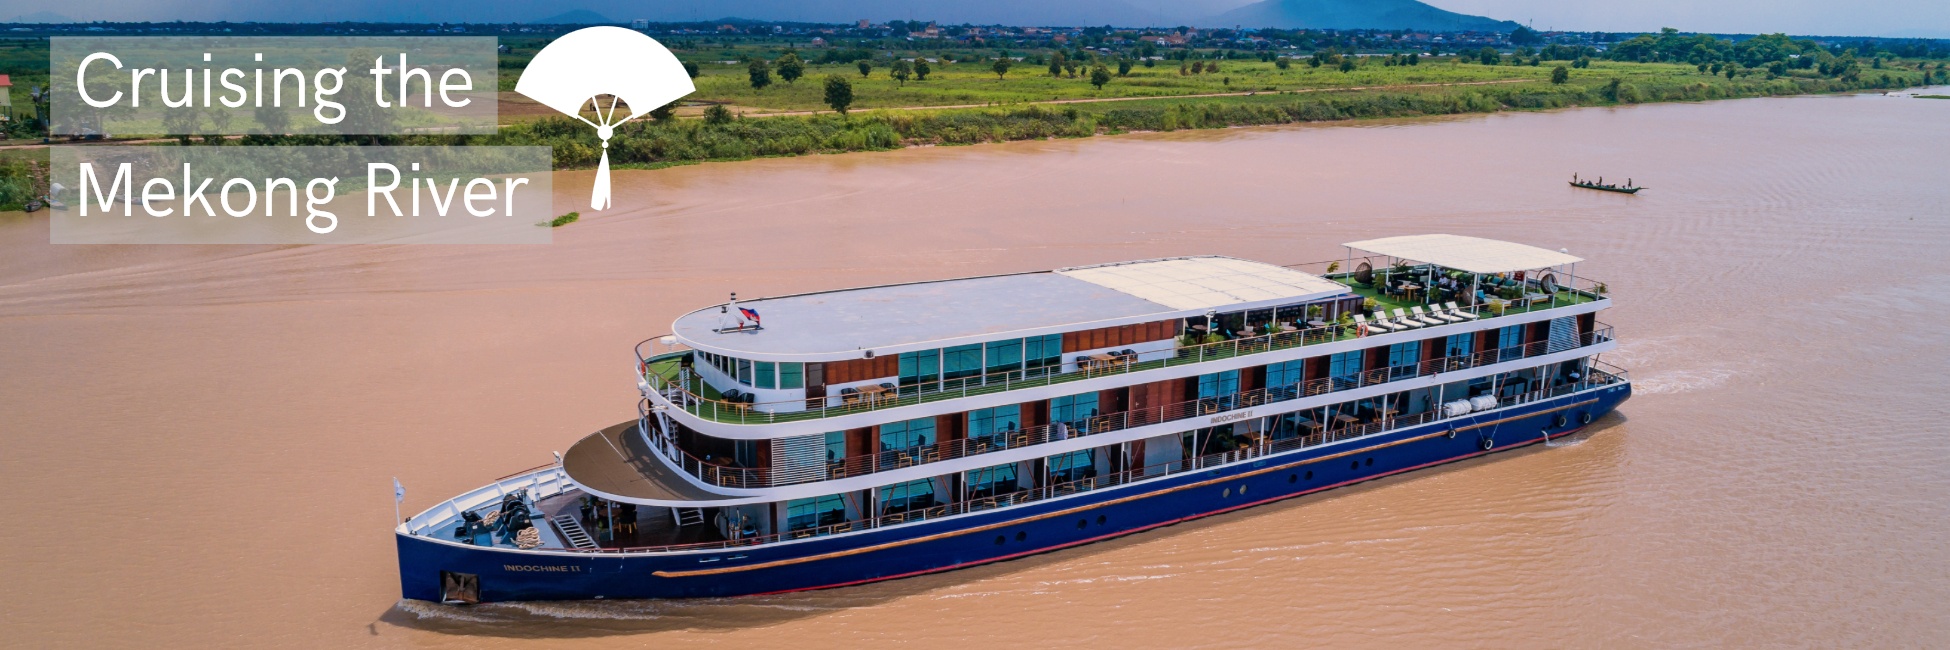 Cruising the Mékong River with CroisiEurope